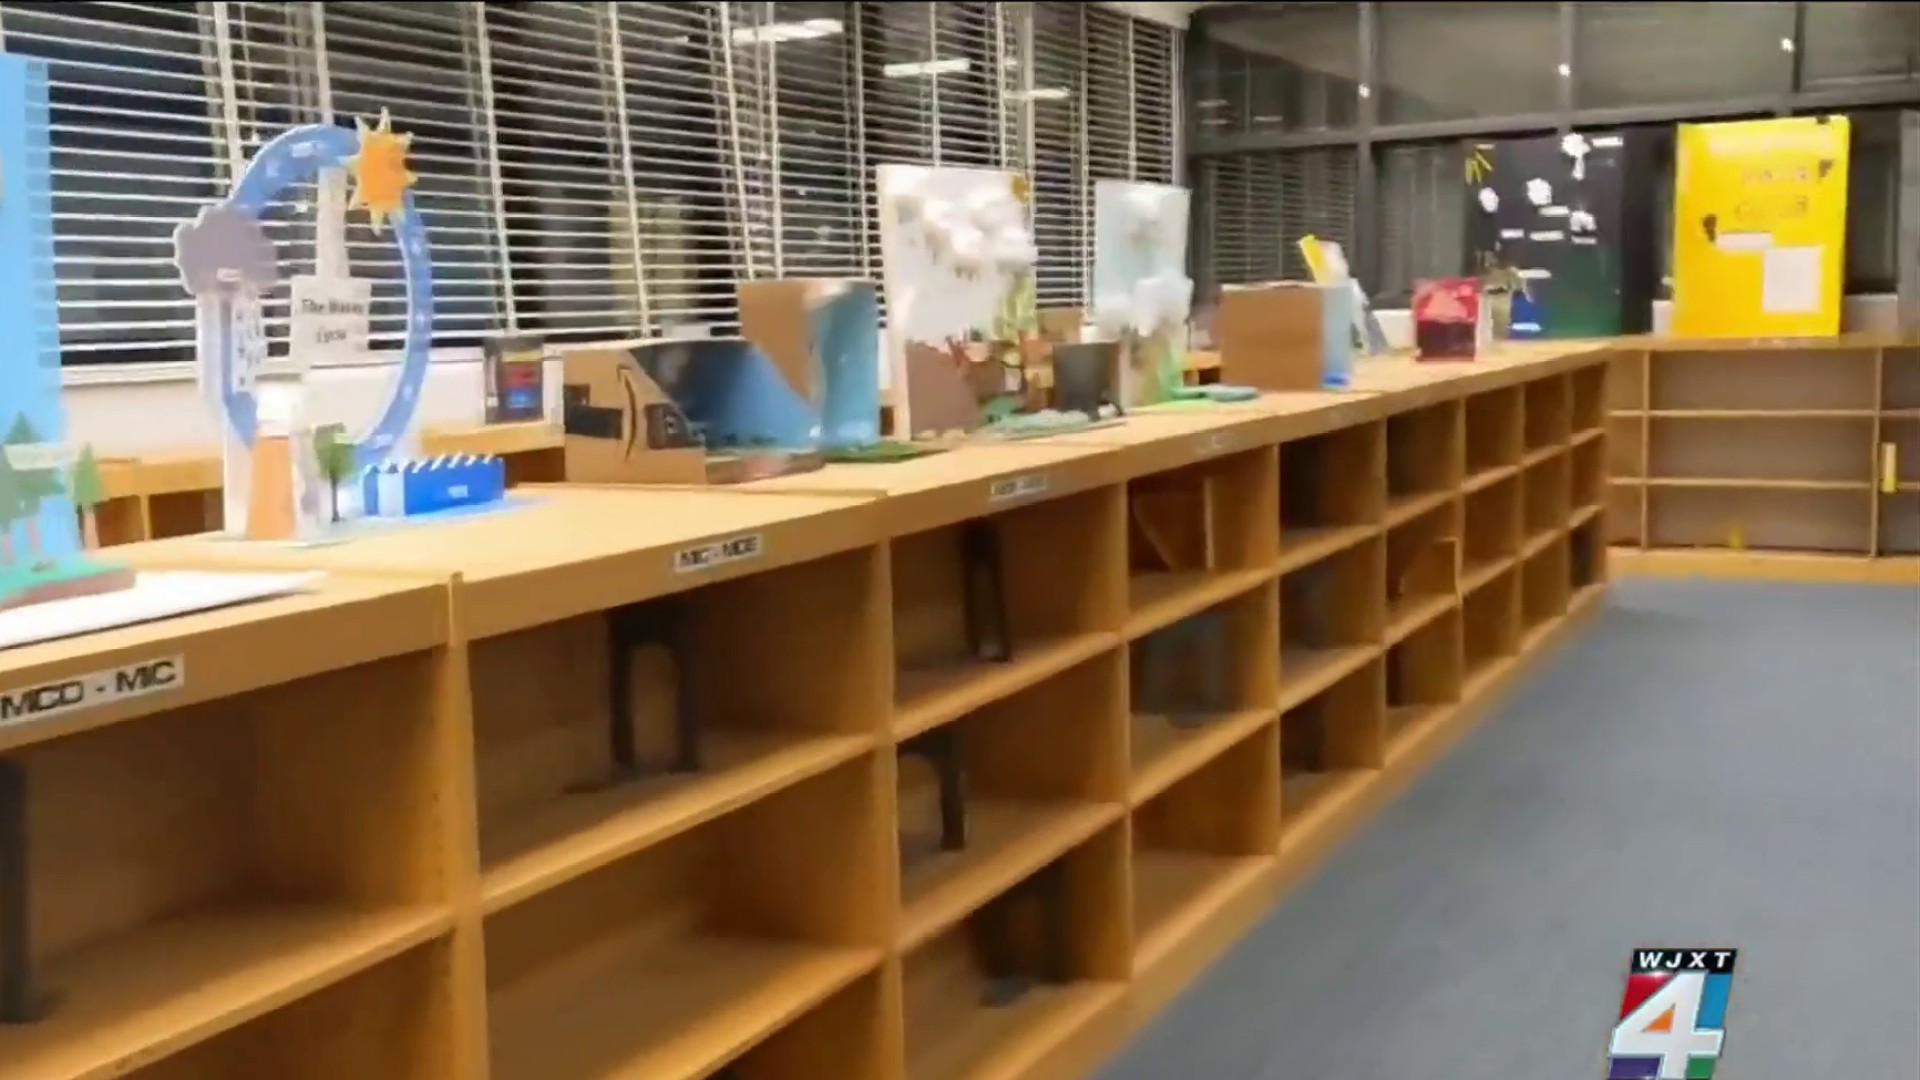 South Carolina: Book removed from middle school book fair